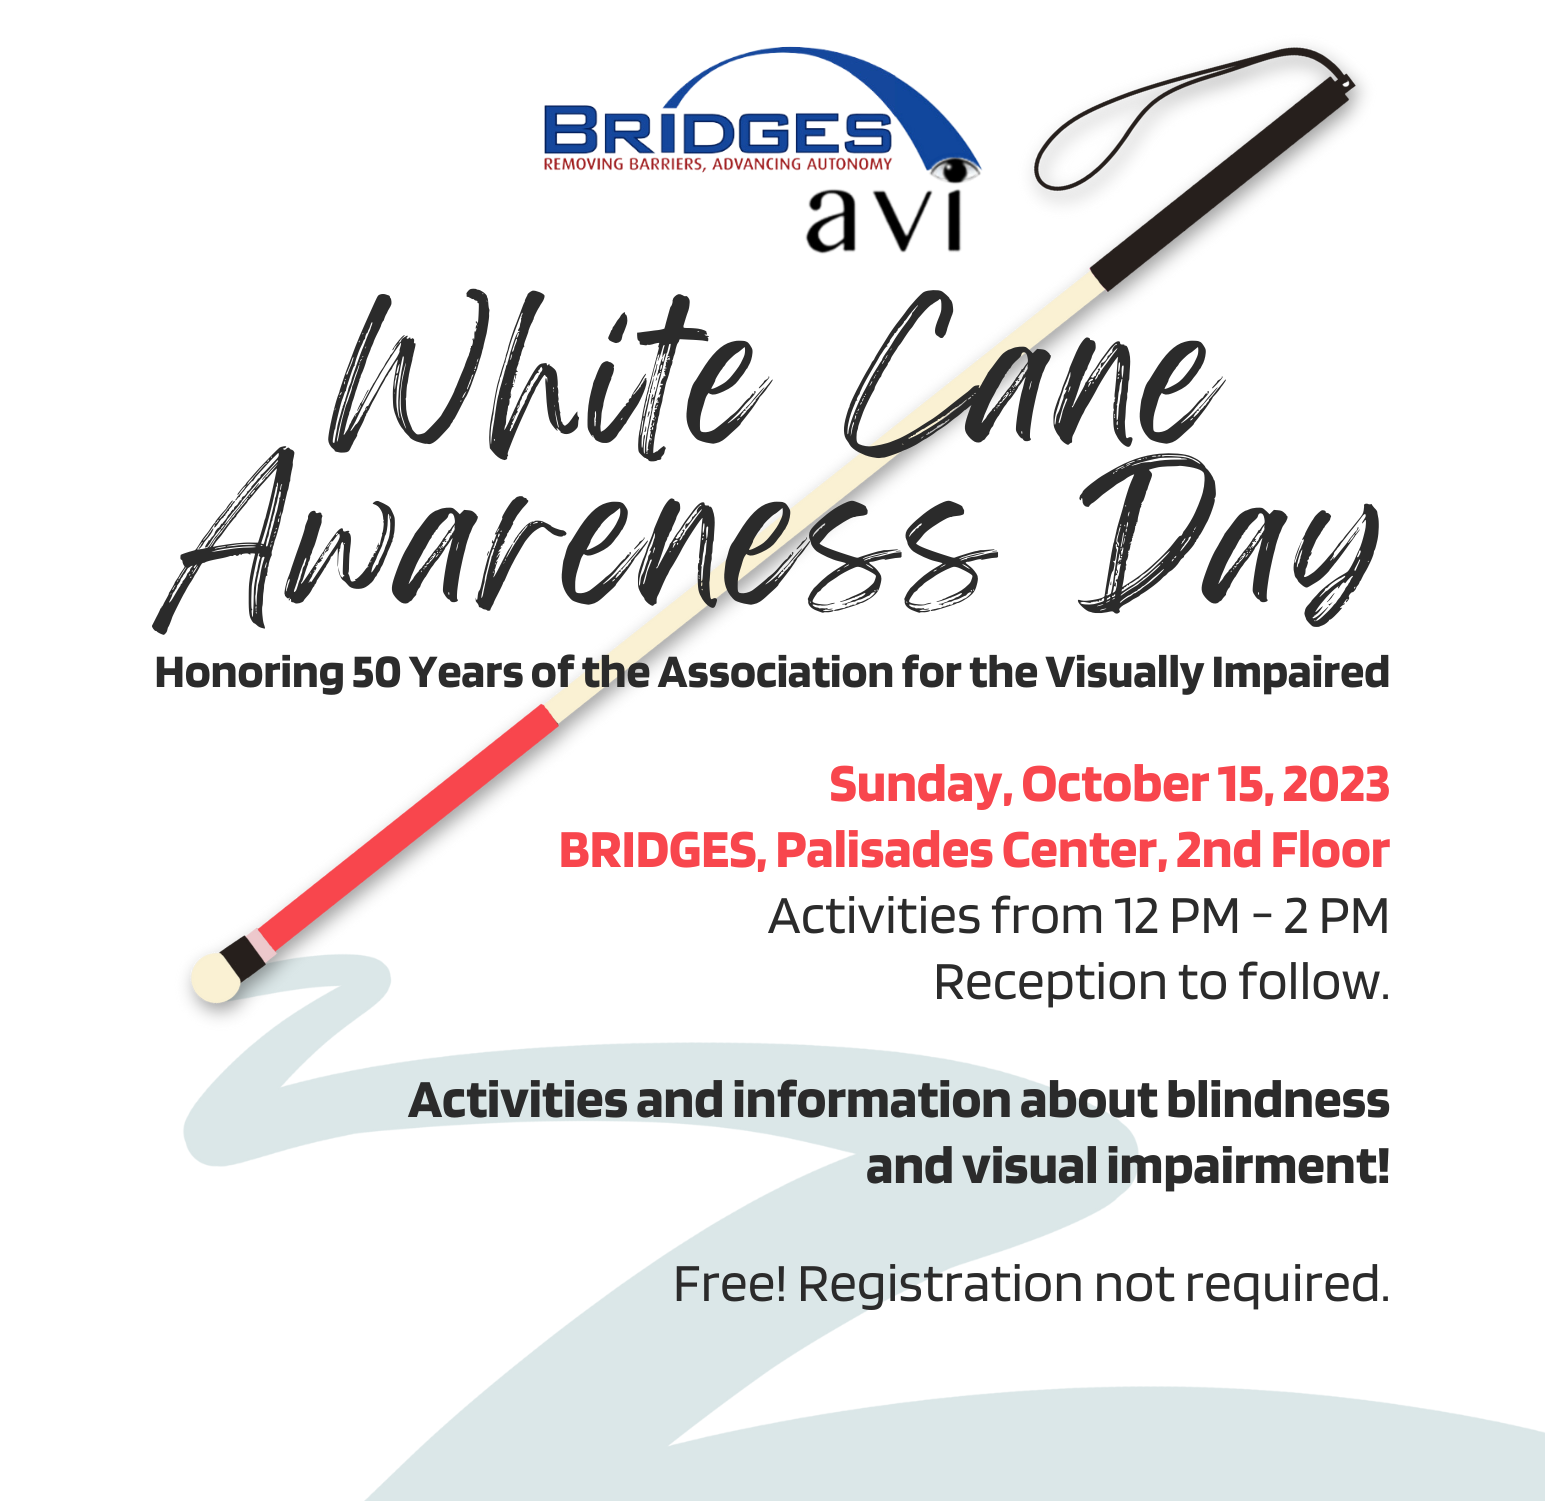 Bridges AVI White Cane Awareness Day. Honoring 50 years of the Association for the Visually Impaired. Sunday, October 15, 2023 at Bridges, Palisades Center, 2nd Floor. Activities from 12 PM to 2 PM and reception to follow. Activities and information about blindness and visual impairment. Free! Registration not required.